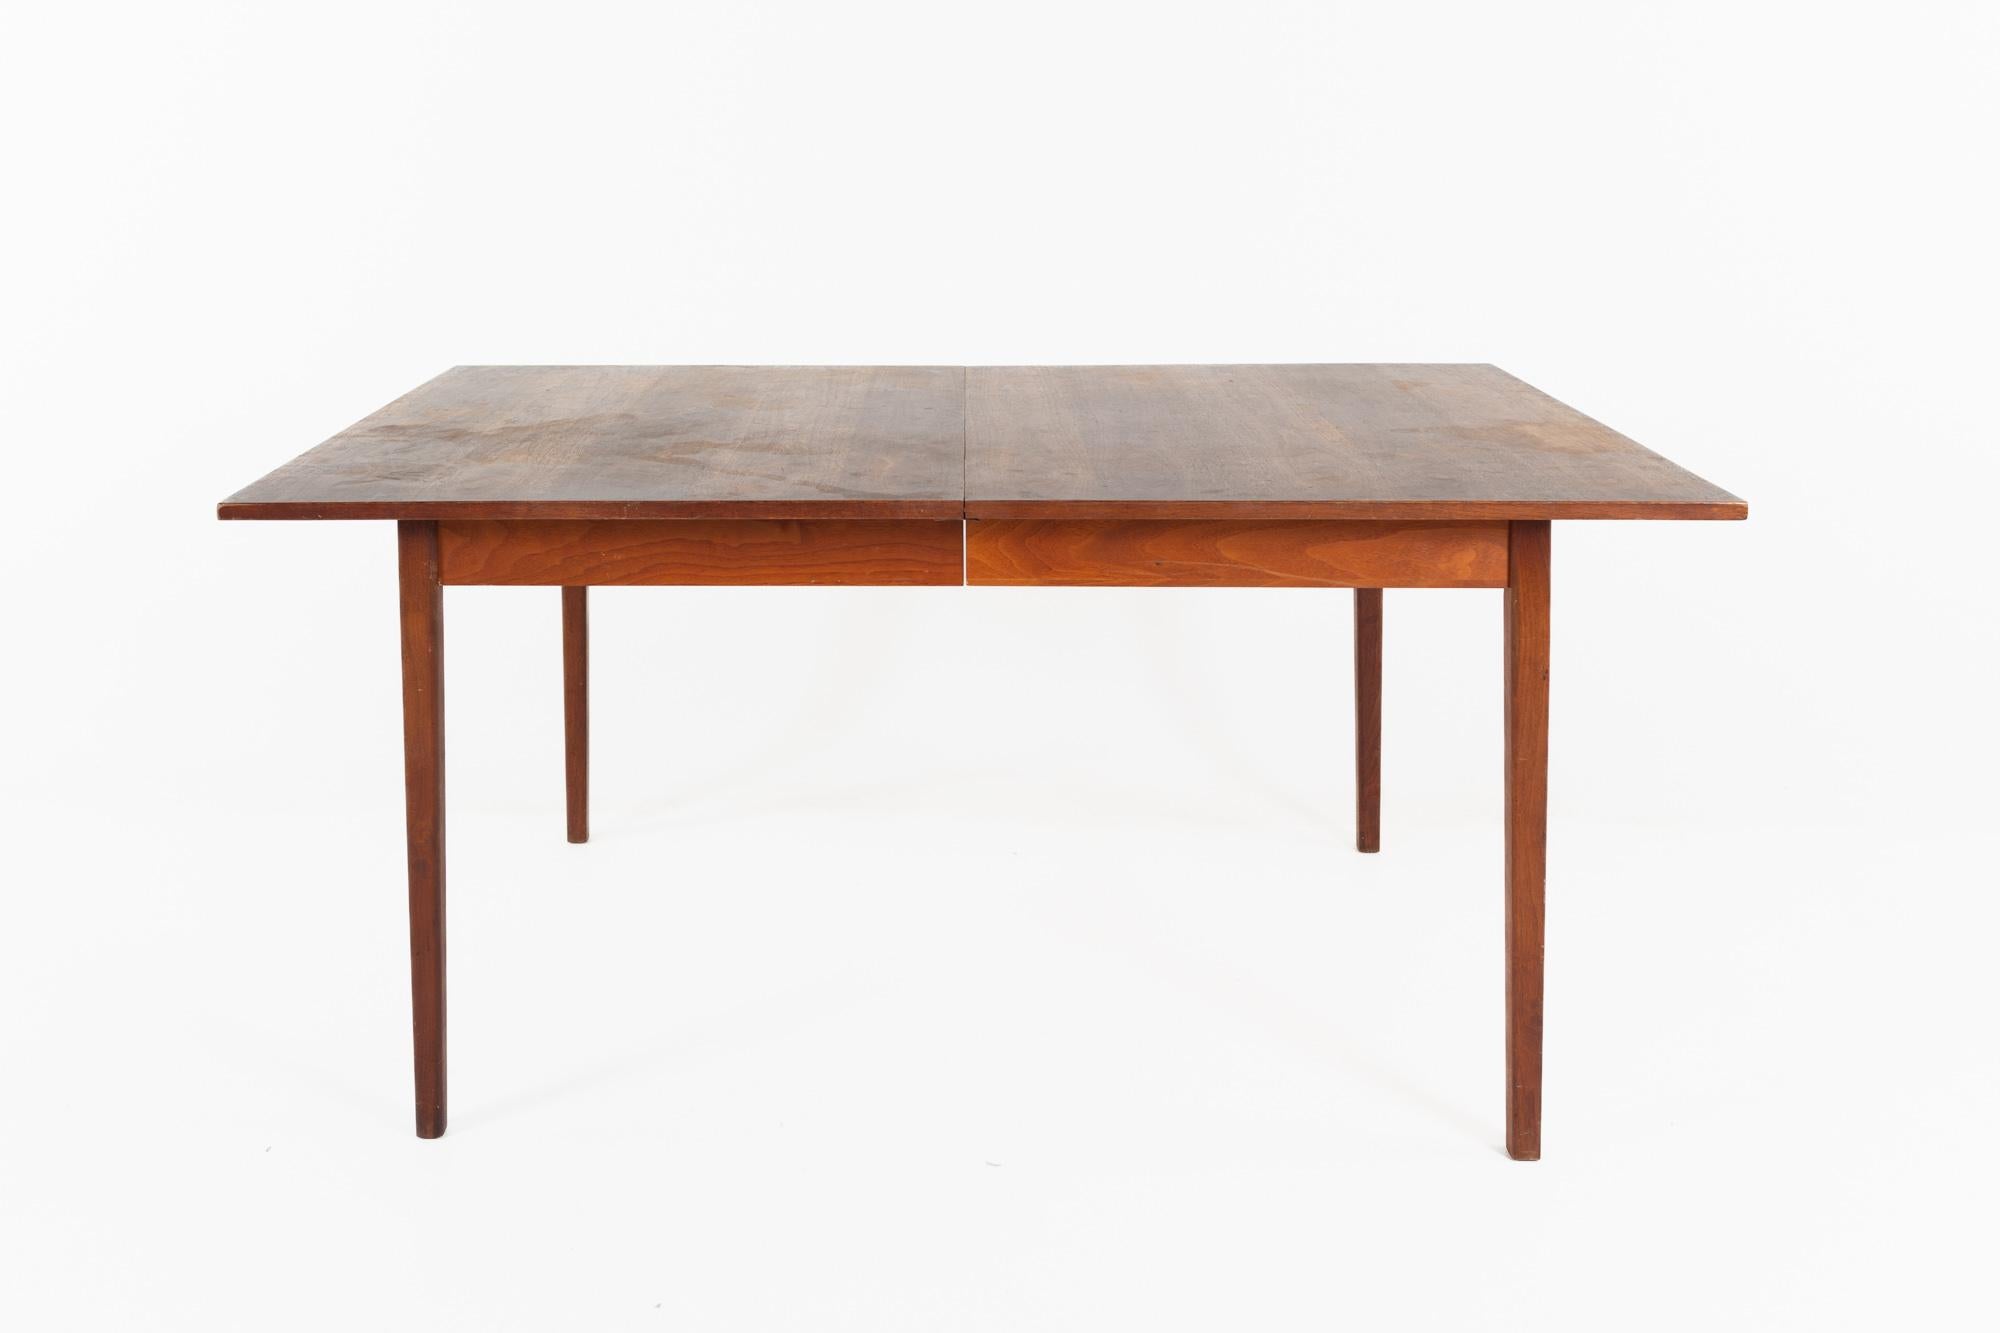 John Stuart for Mount Airy style mid century walnut dining table with leaf

This table measures: 64 wide x 42 deep x 28 inches high, with a chair clearance of 25 inches, the leaf is 20 inches wide, making a maximum table width of 84 inches

All